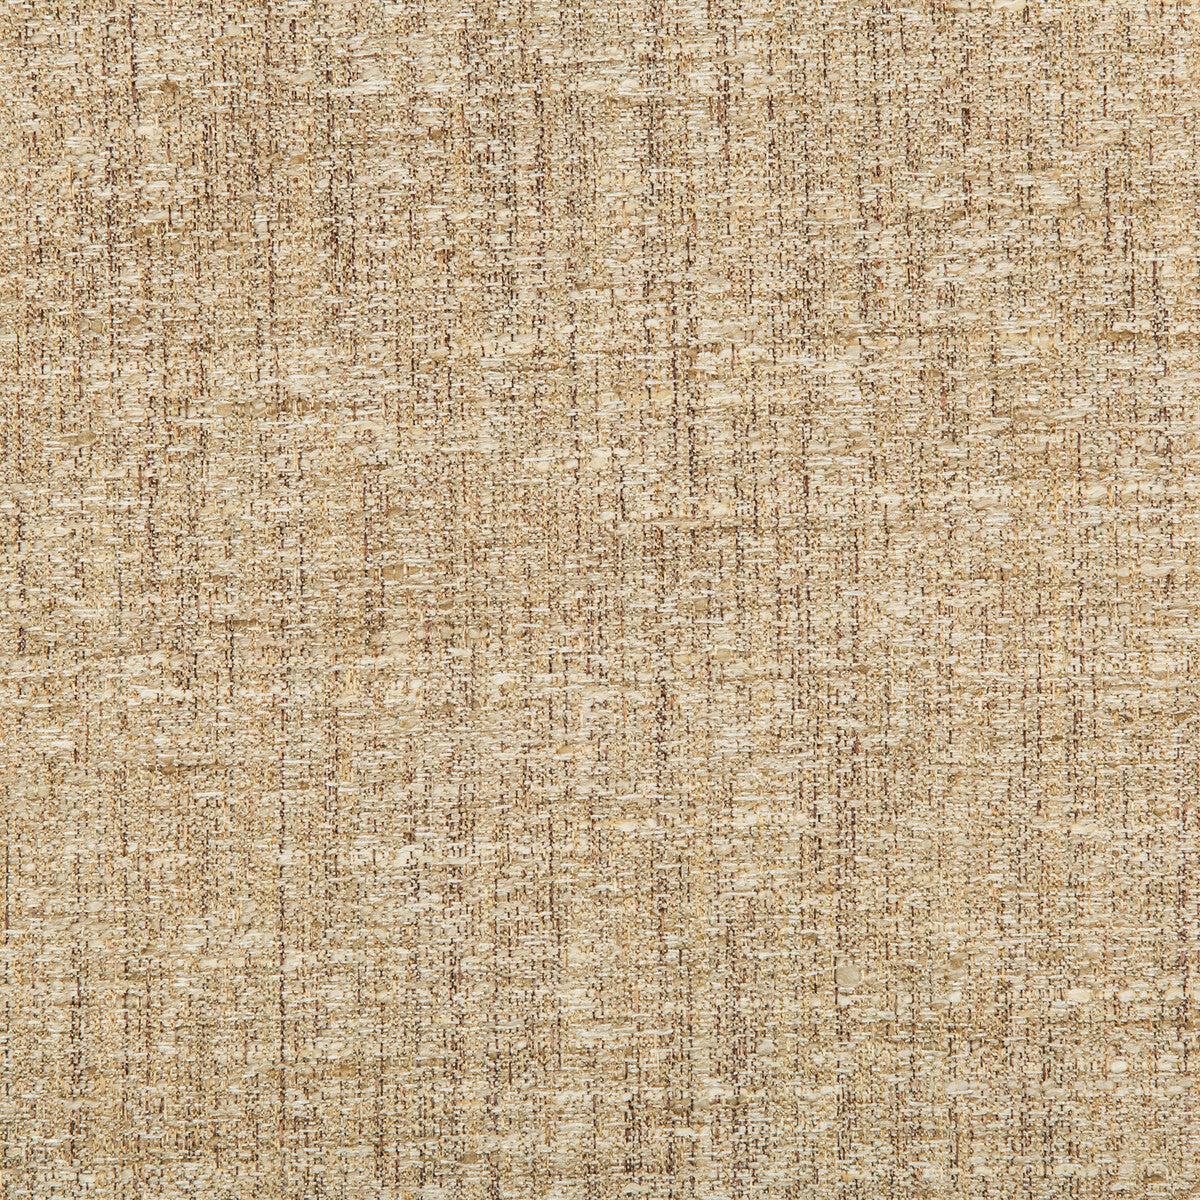 Kravet Contract fabric in 4647-16 color - pattern 4647.16.0 - by Kravet Contract